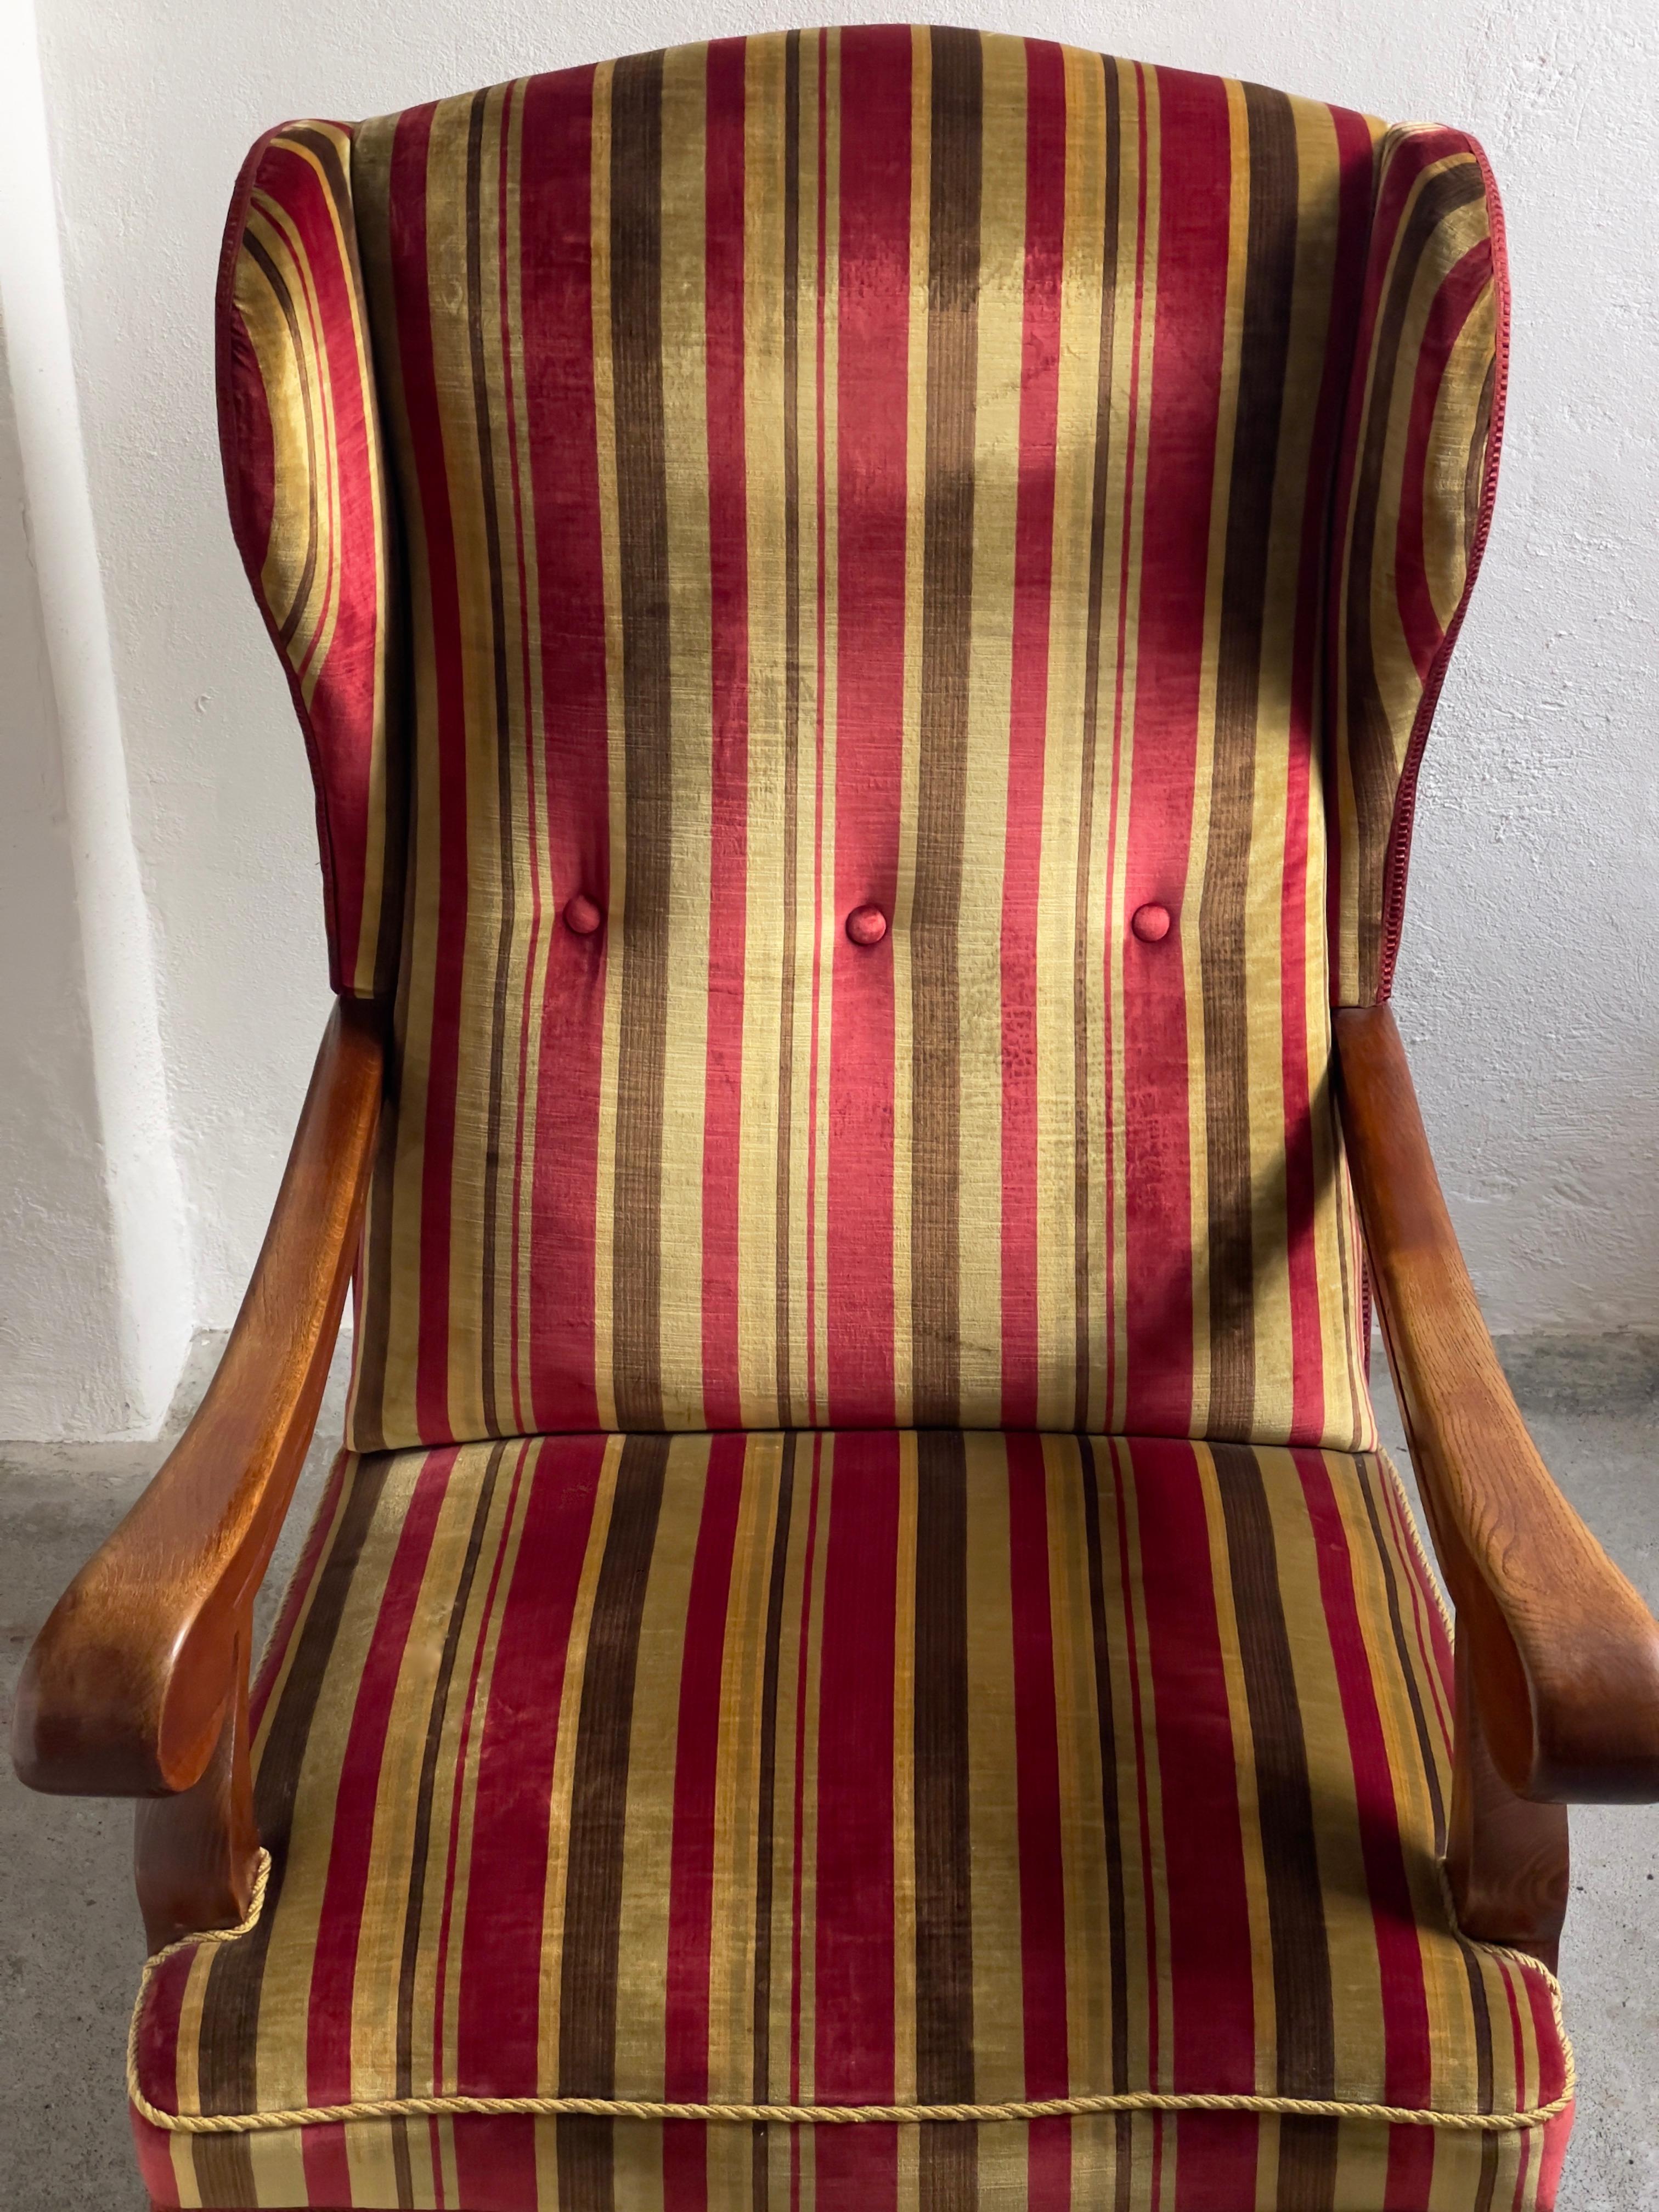 1930s Danish Modern Lounge Chair in Solid Oak and Striped Velvet Upholstery  For Sale 6